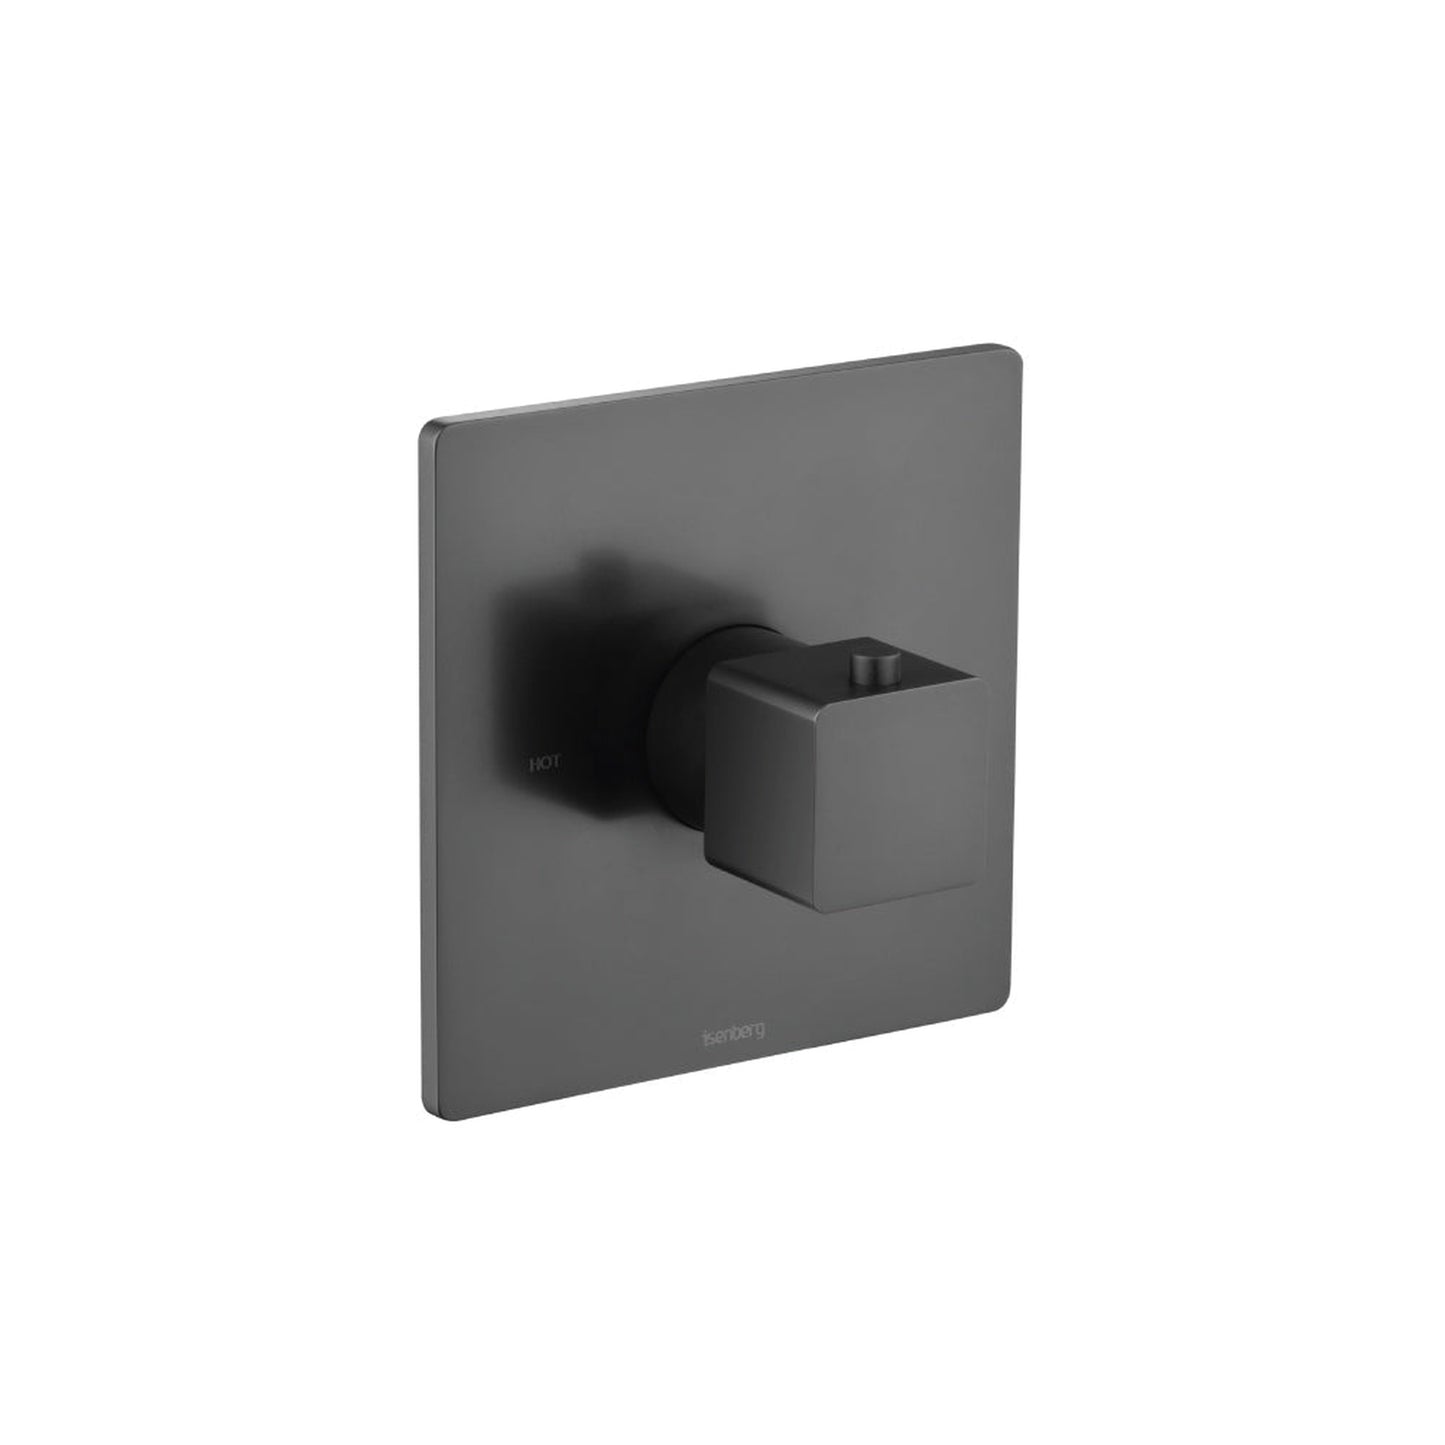 Isenberg Serie 196 Single Output Trim for 3/4" Thermostatic Valve in Matte Black